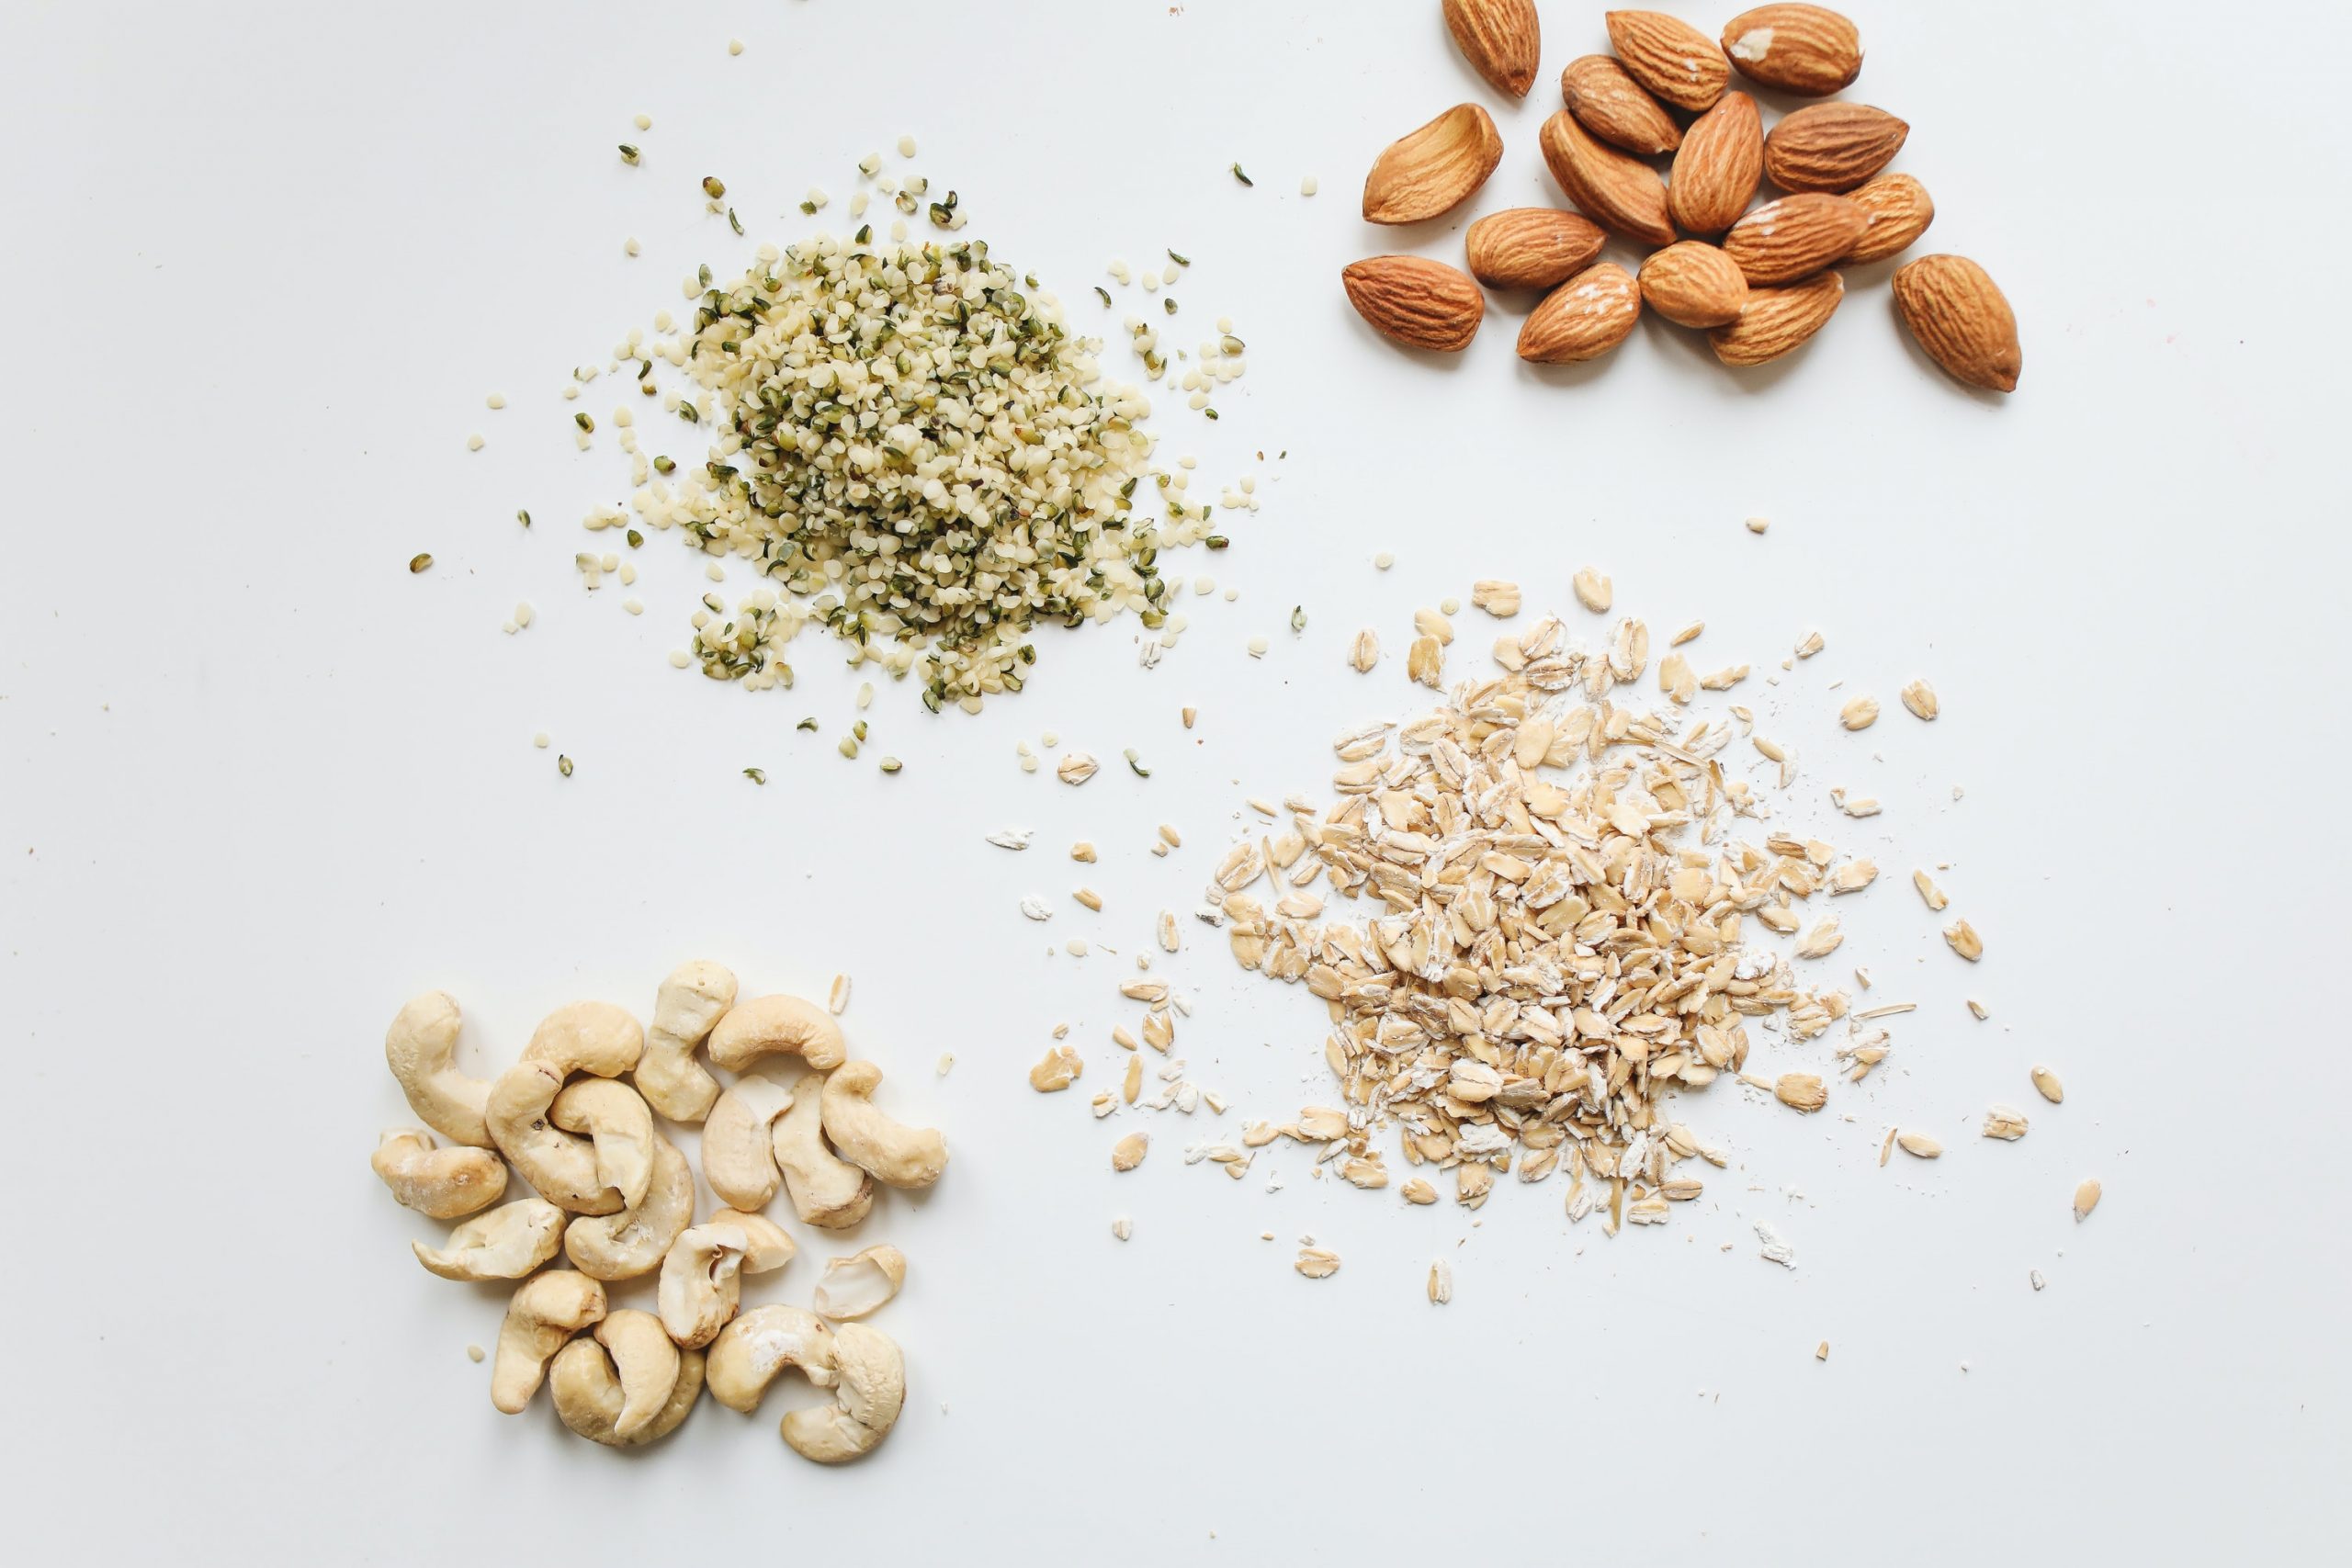 Oats, nuts, and seeds